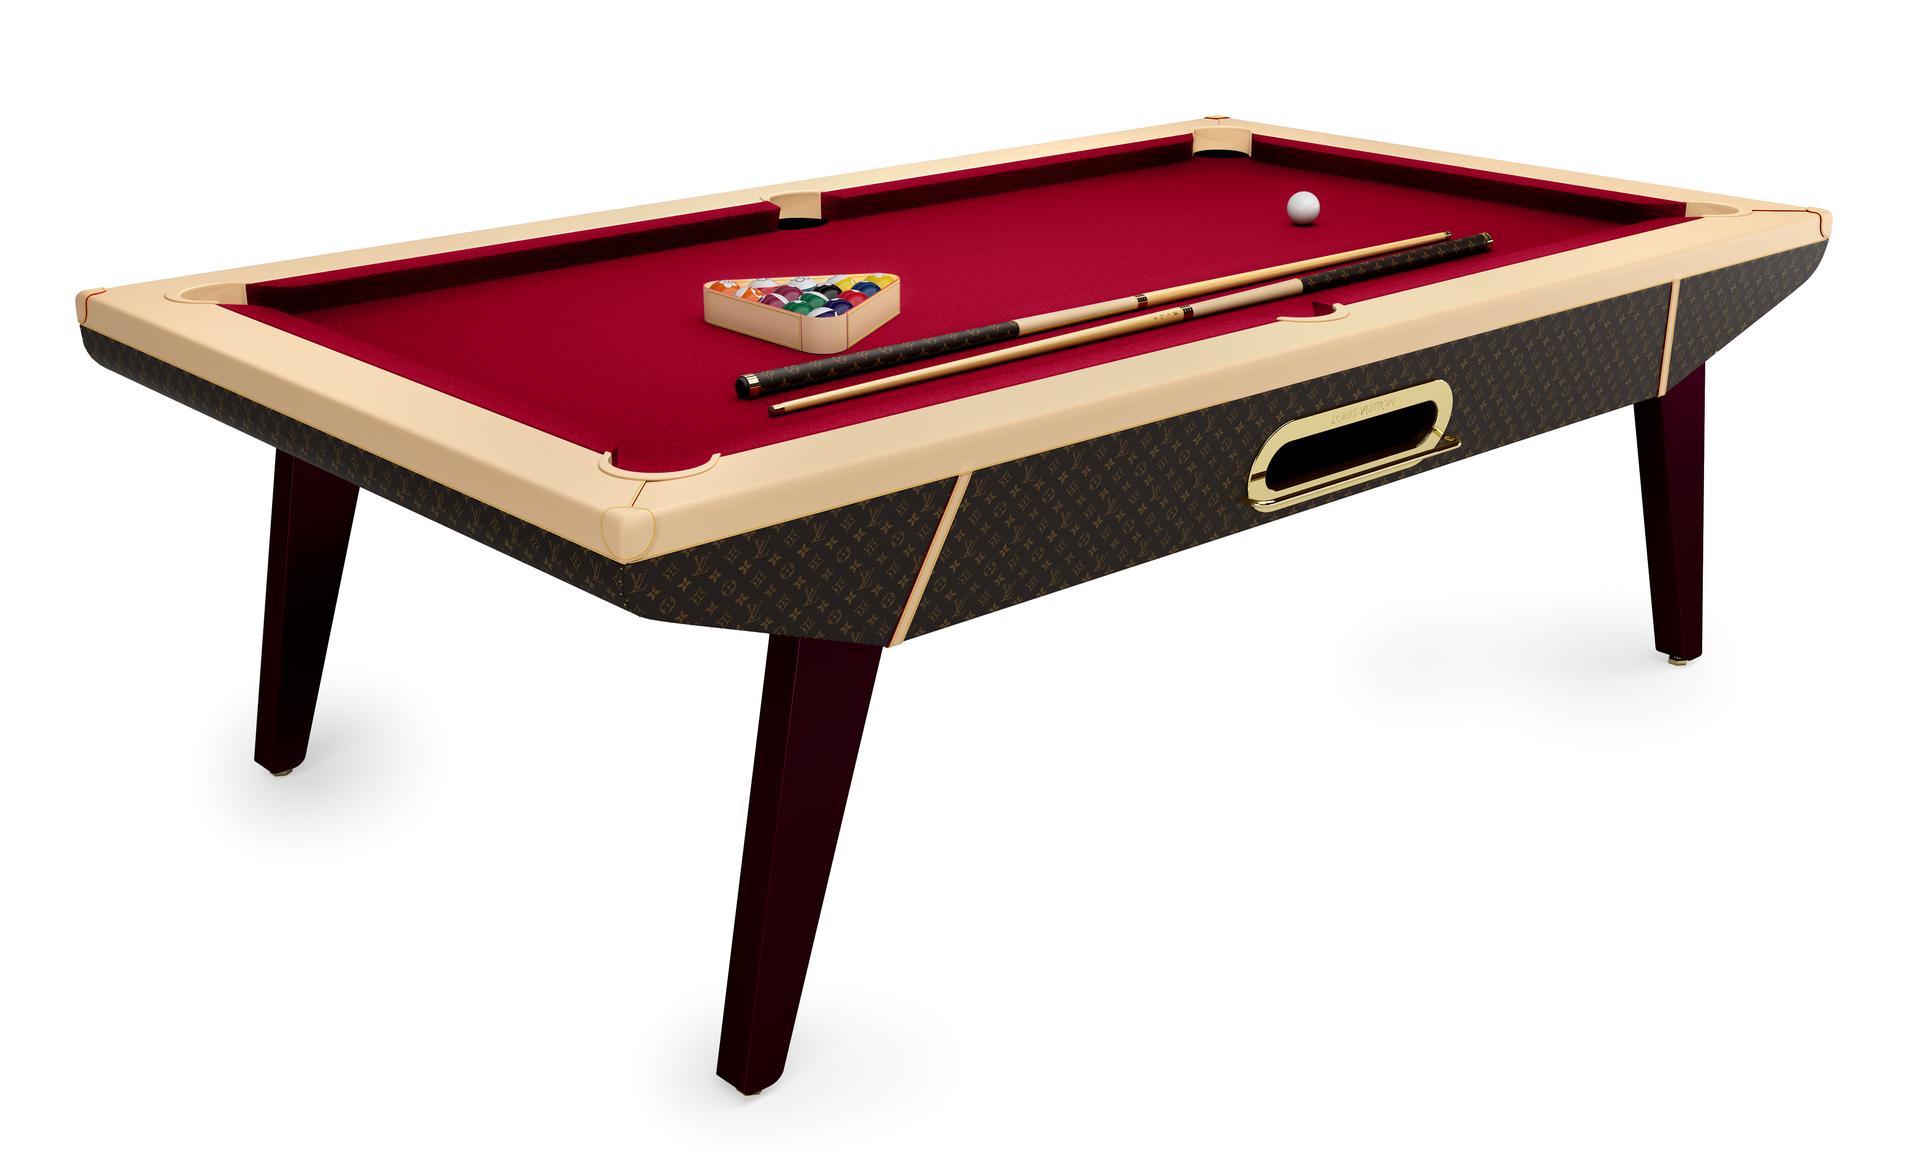 Pot luck: Why Louis Vuitton's Dh435,000 billiards table is a game